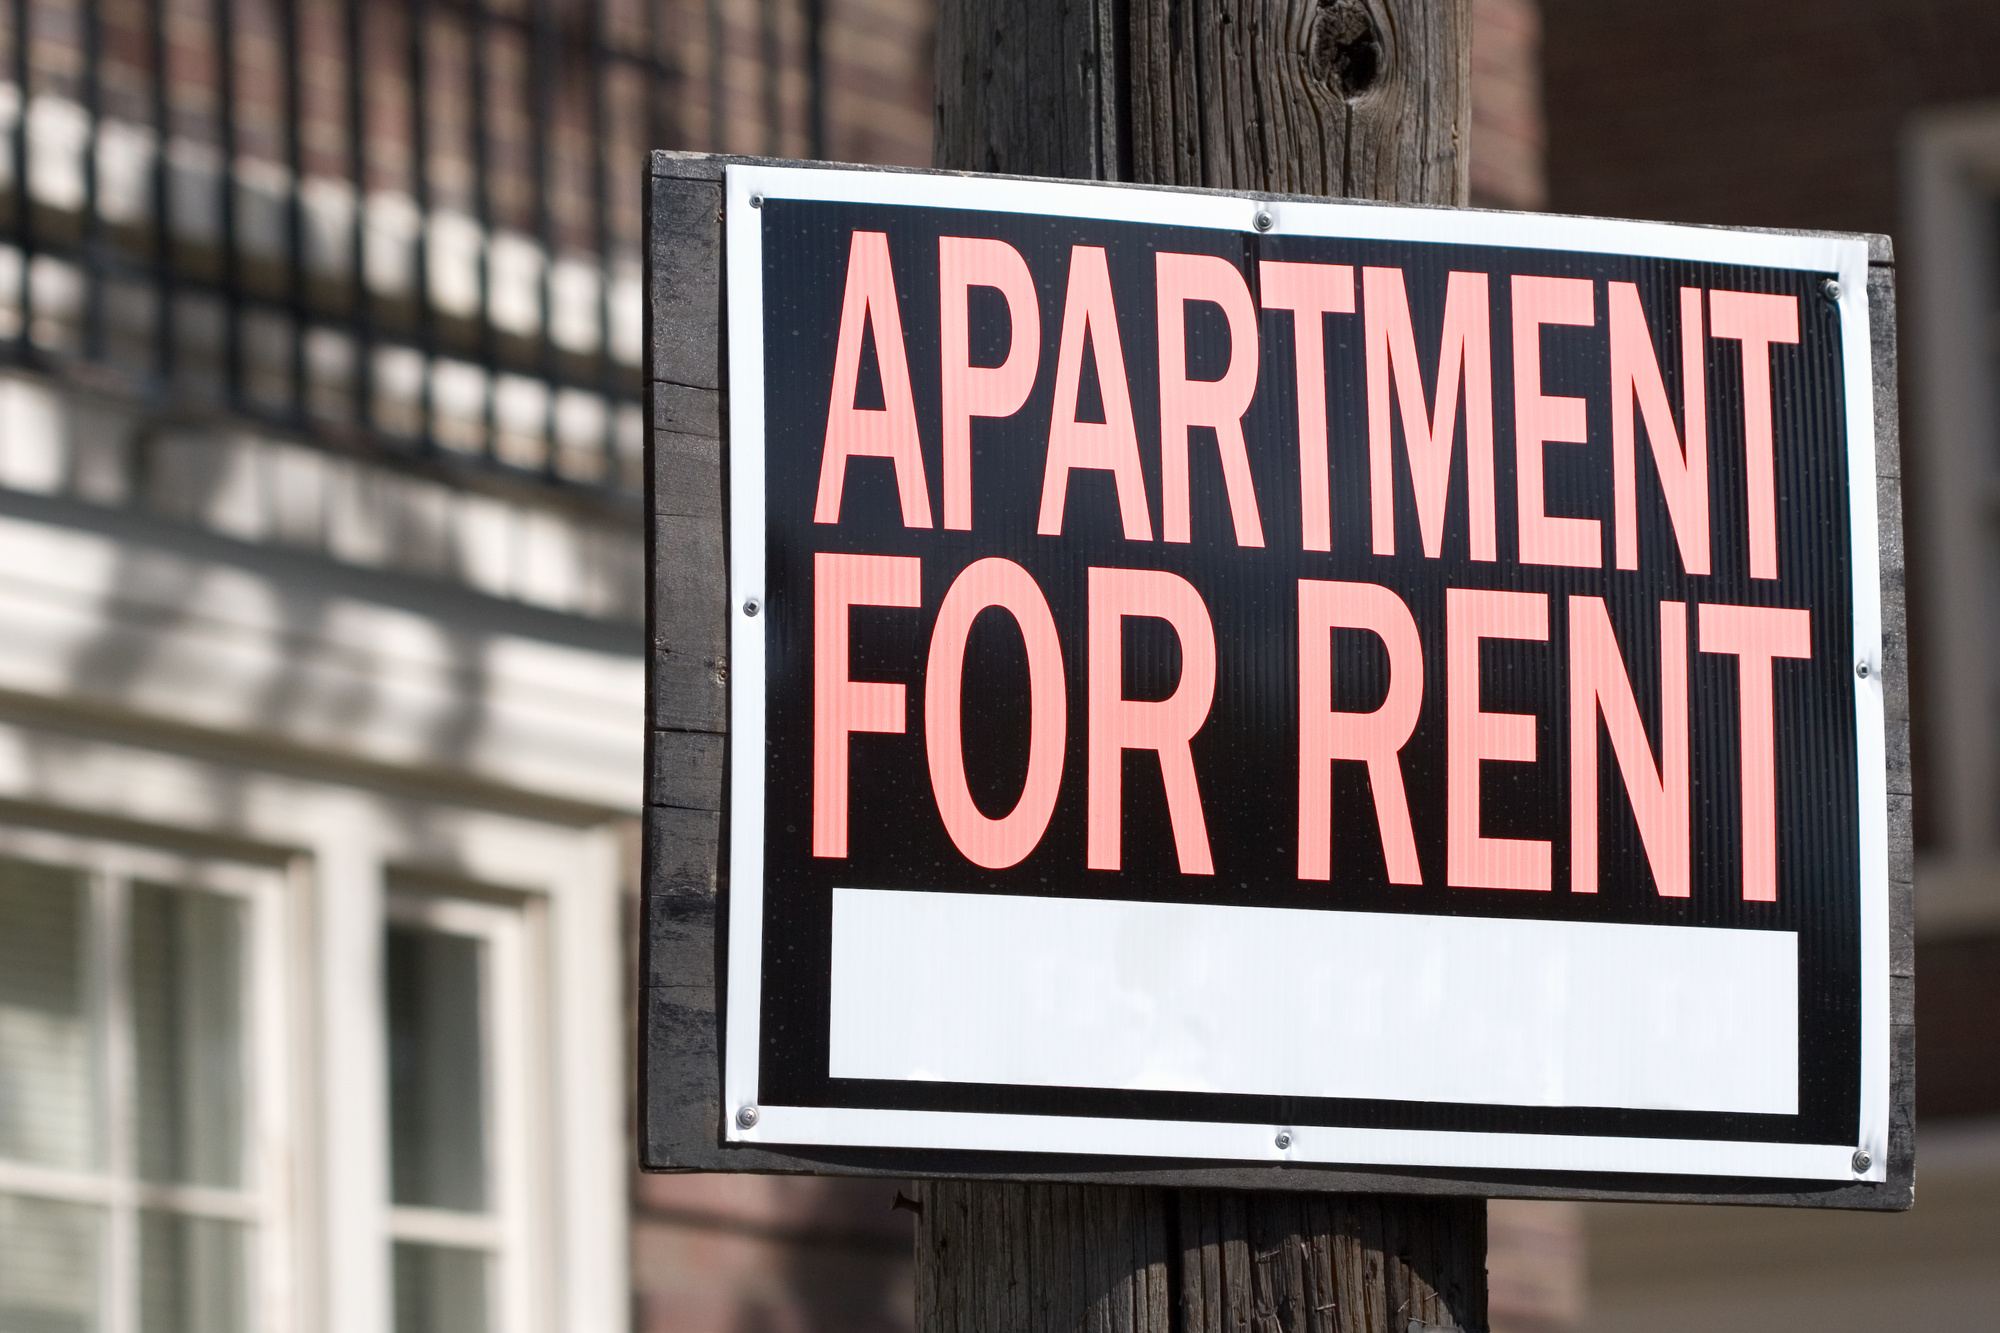 Renting an Apartment